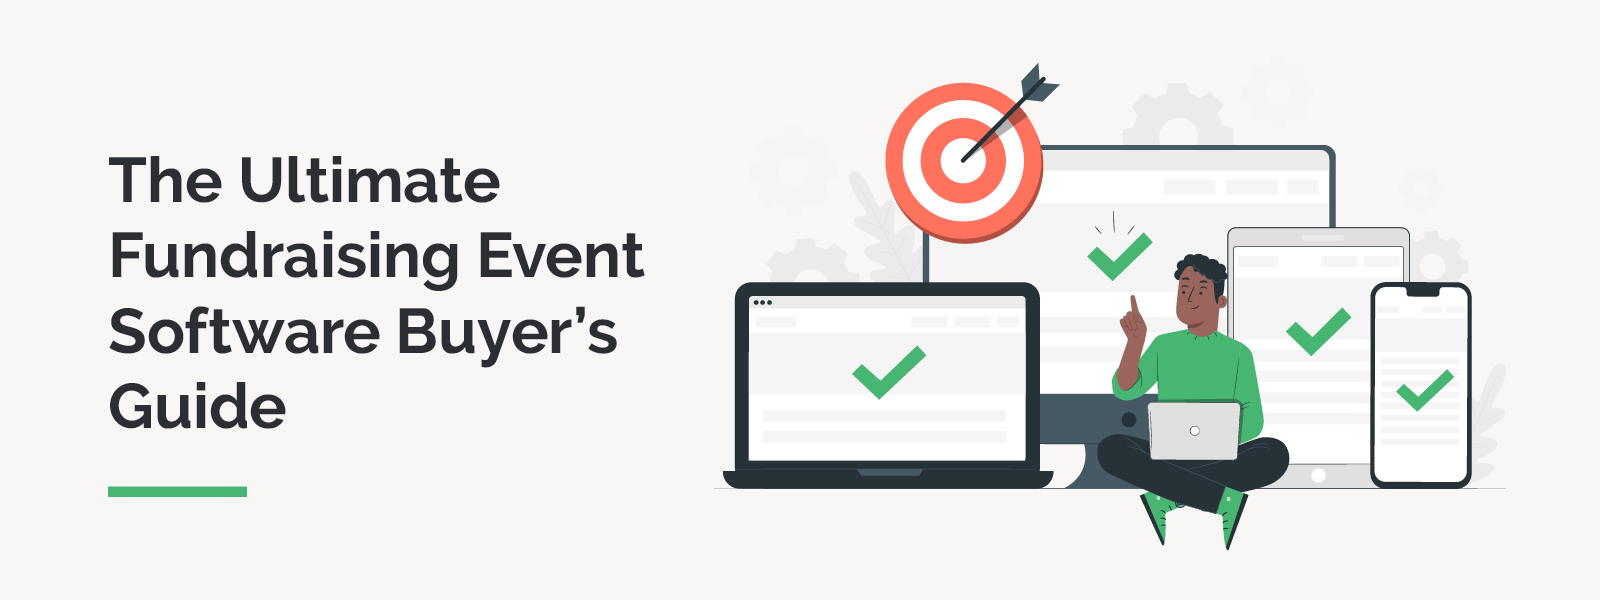 The Ultimate Fundraising Event Software Buyer's Guide